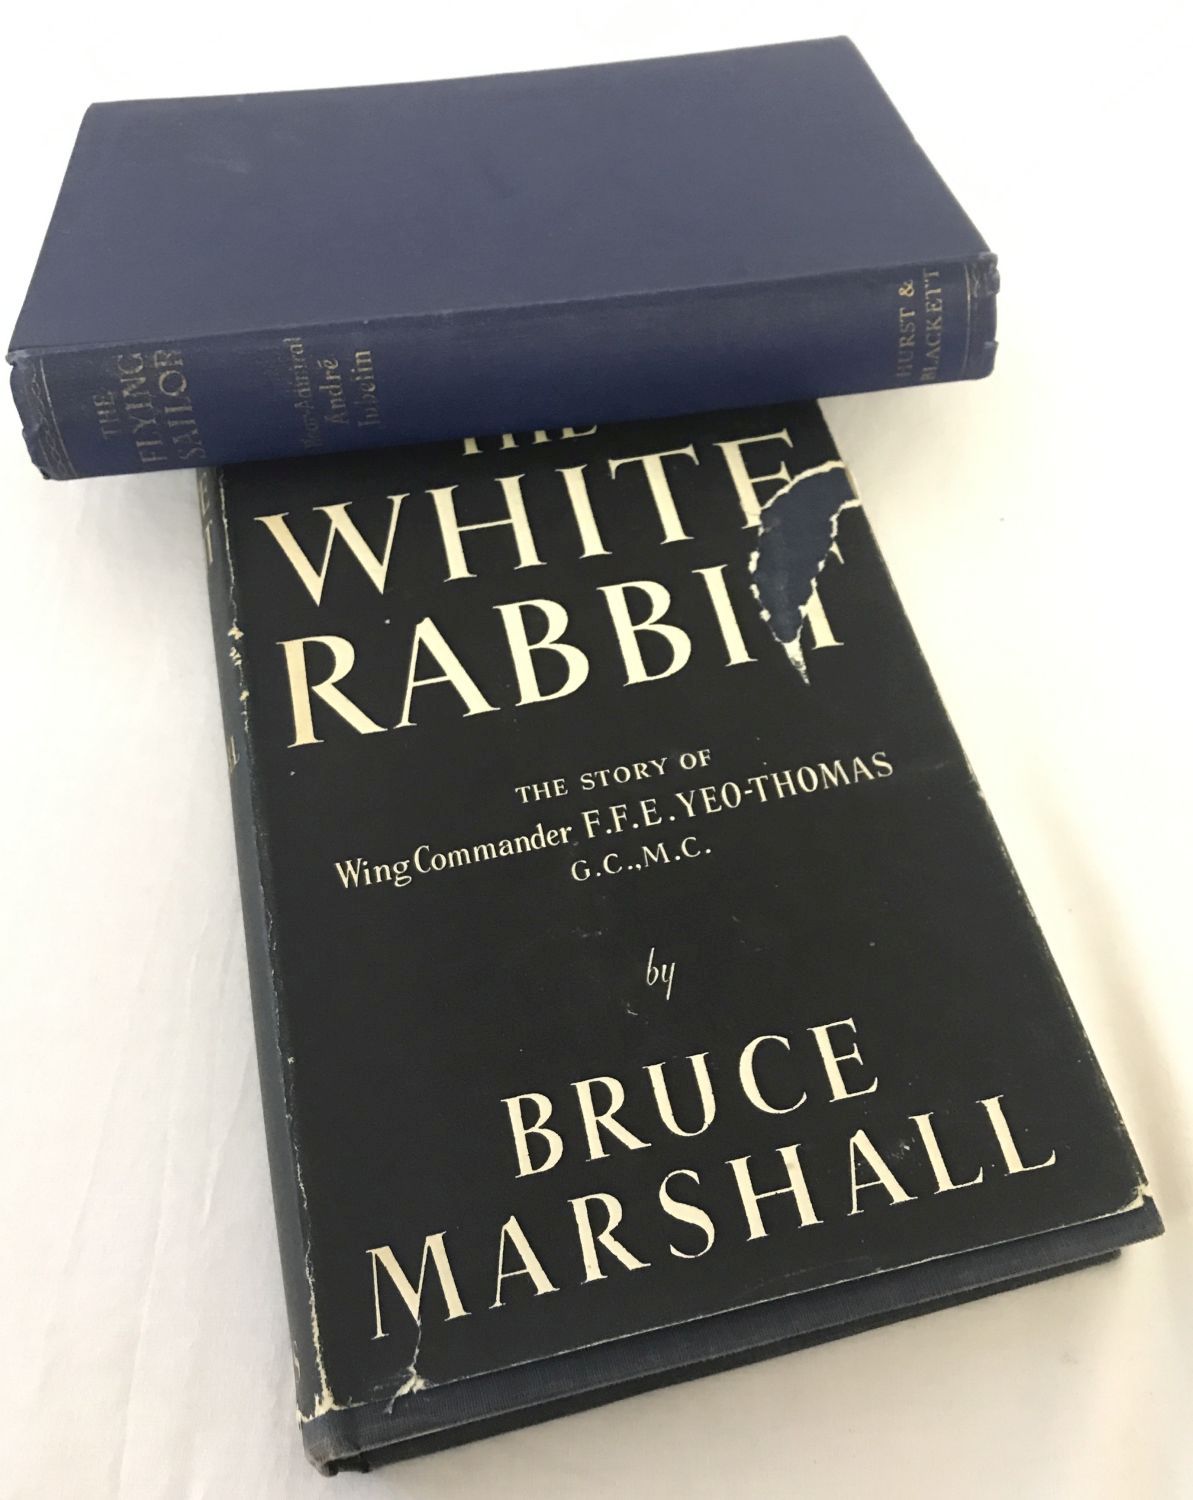 2 vintage military books. "The White Rabbit" by Bruce Marshall.